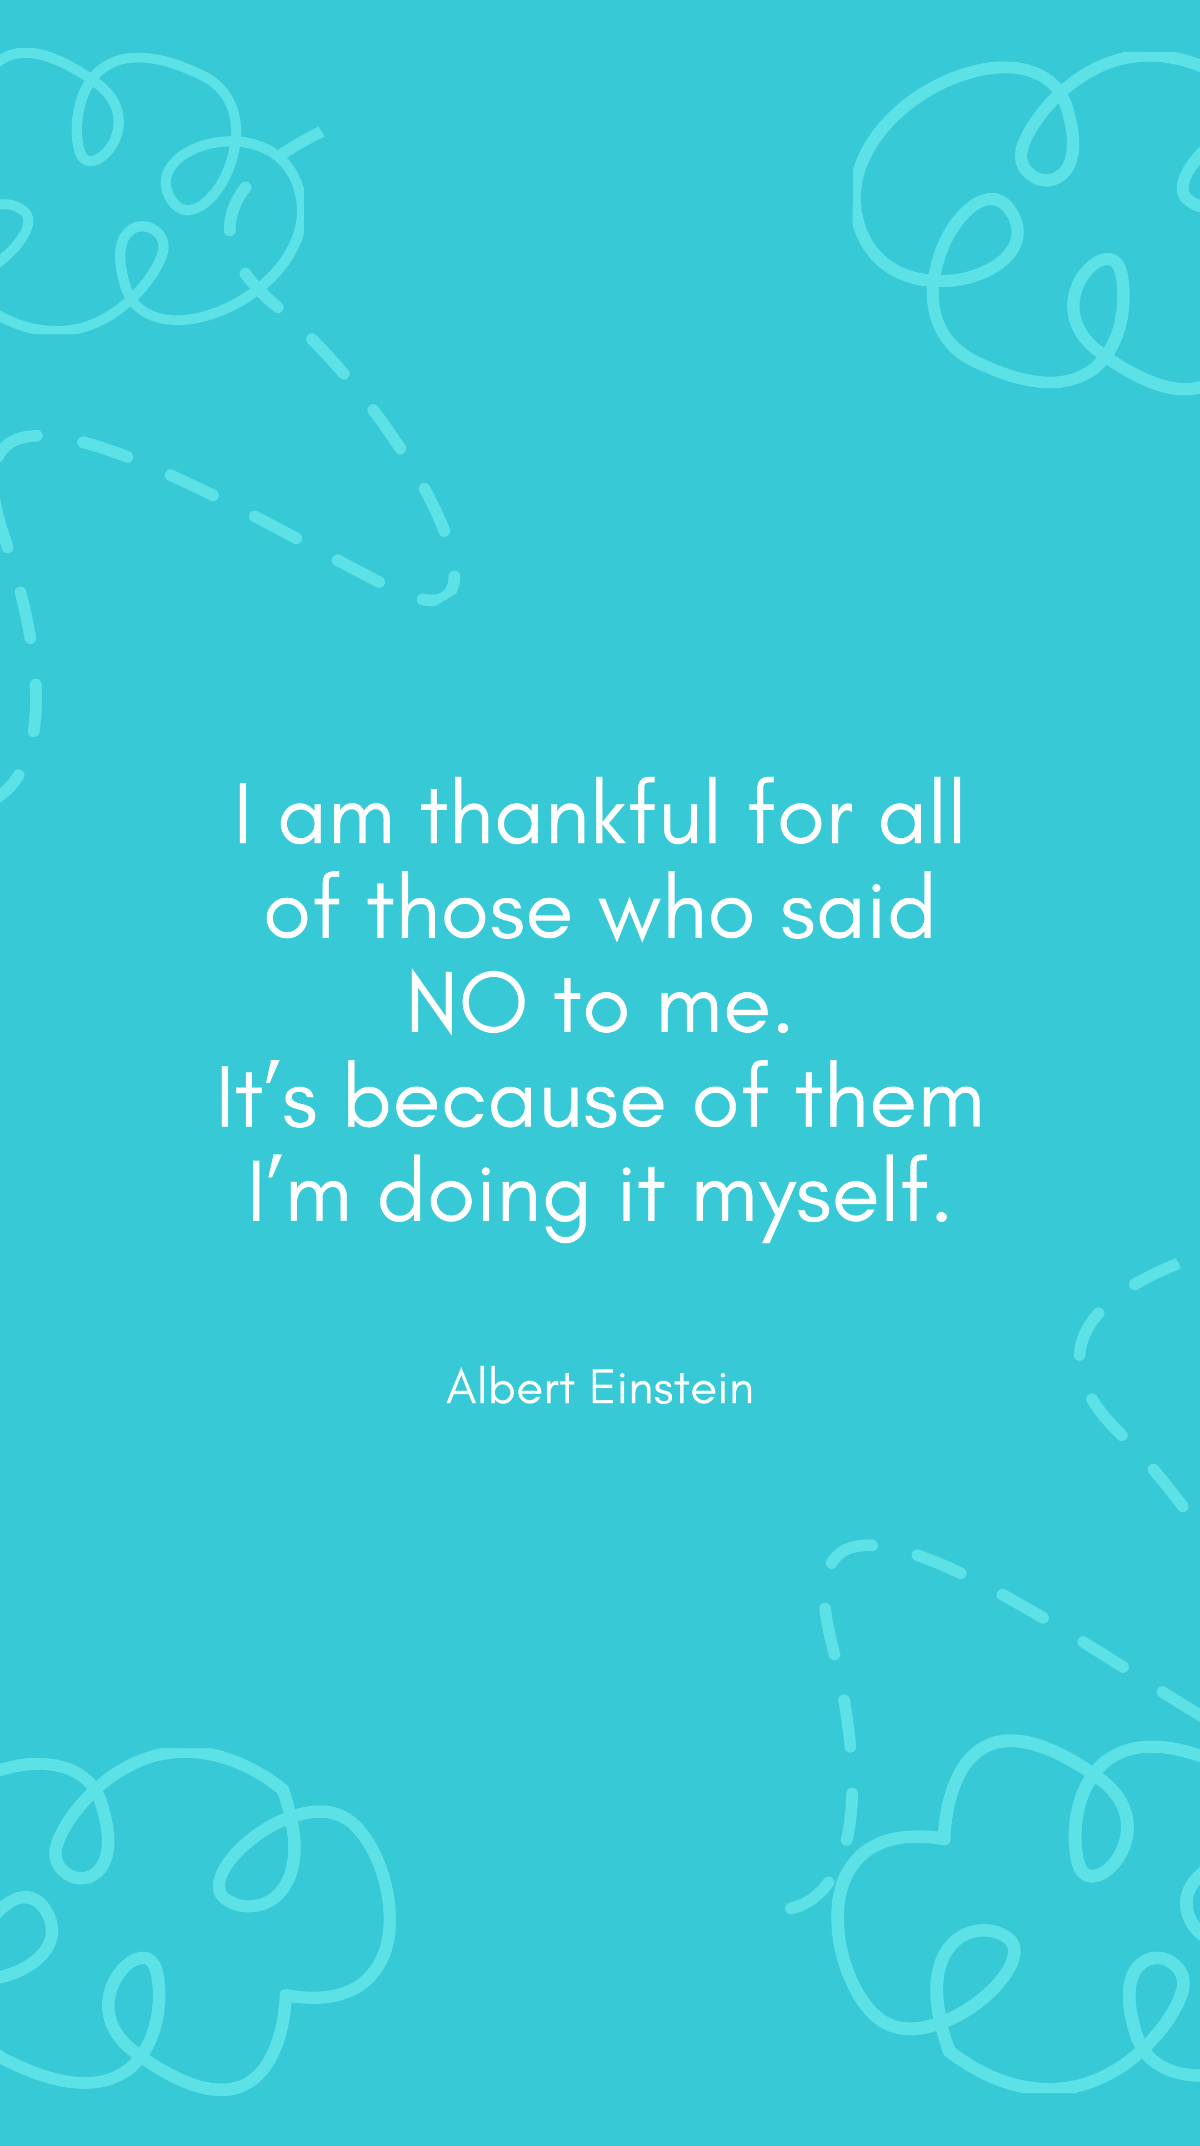 Albert Einstein - I am thankful for all of those who said NO to me. It’s because of them I’m doing it myself.